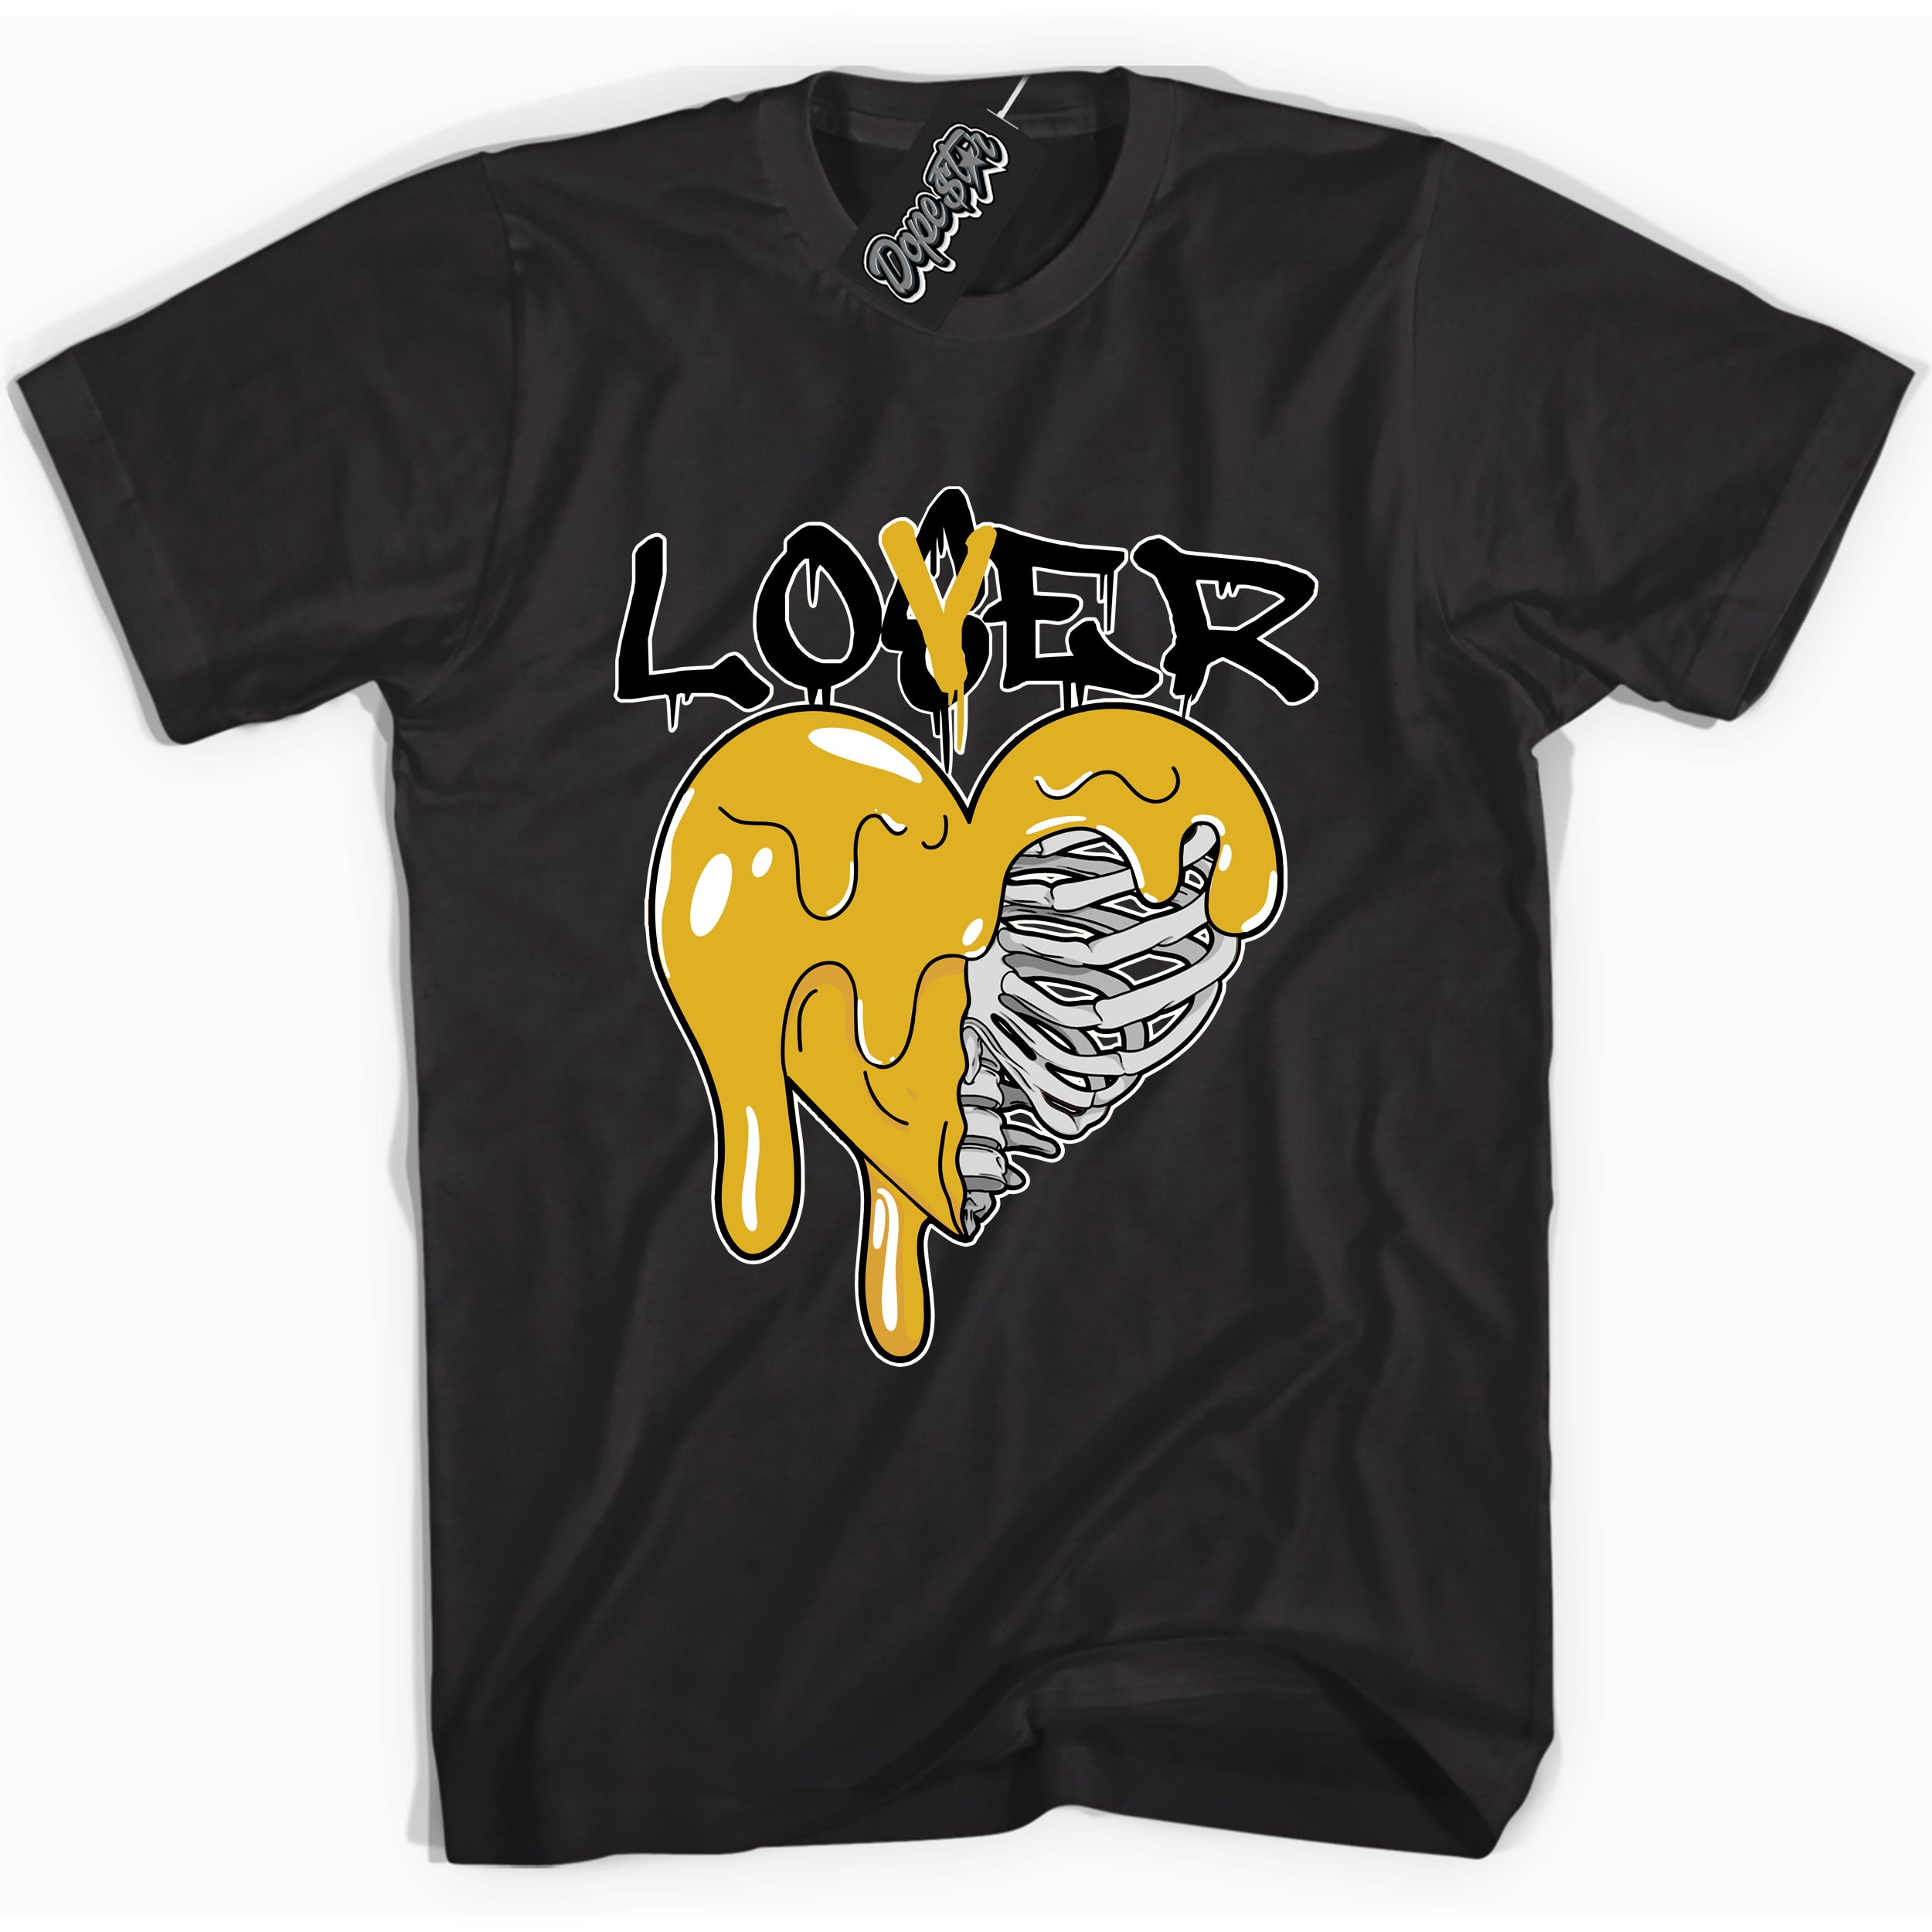 Cool Black Shirt With Lover Loser design That Perfectly Matches AIR JORDAN 6 RETRO YELLOW OCHRE Sneakers.